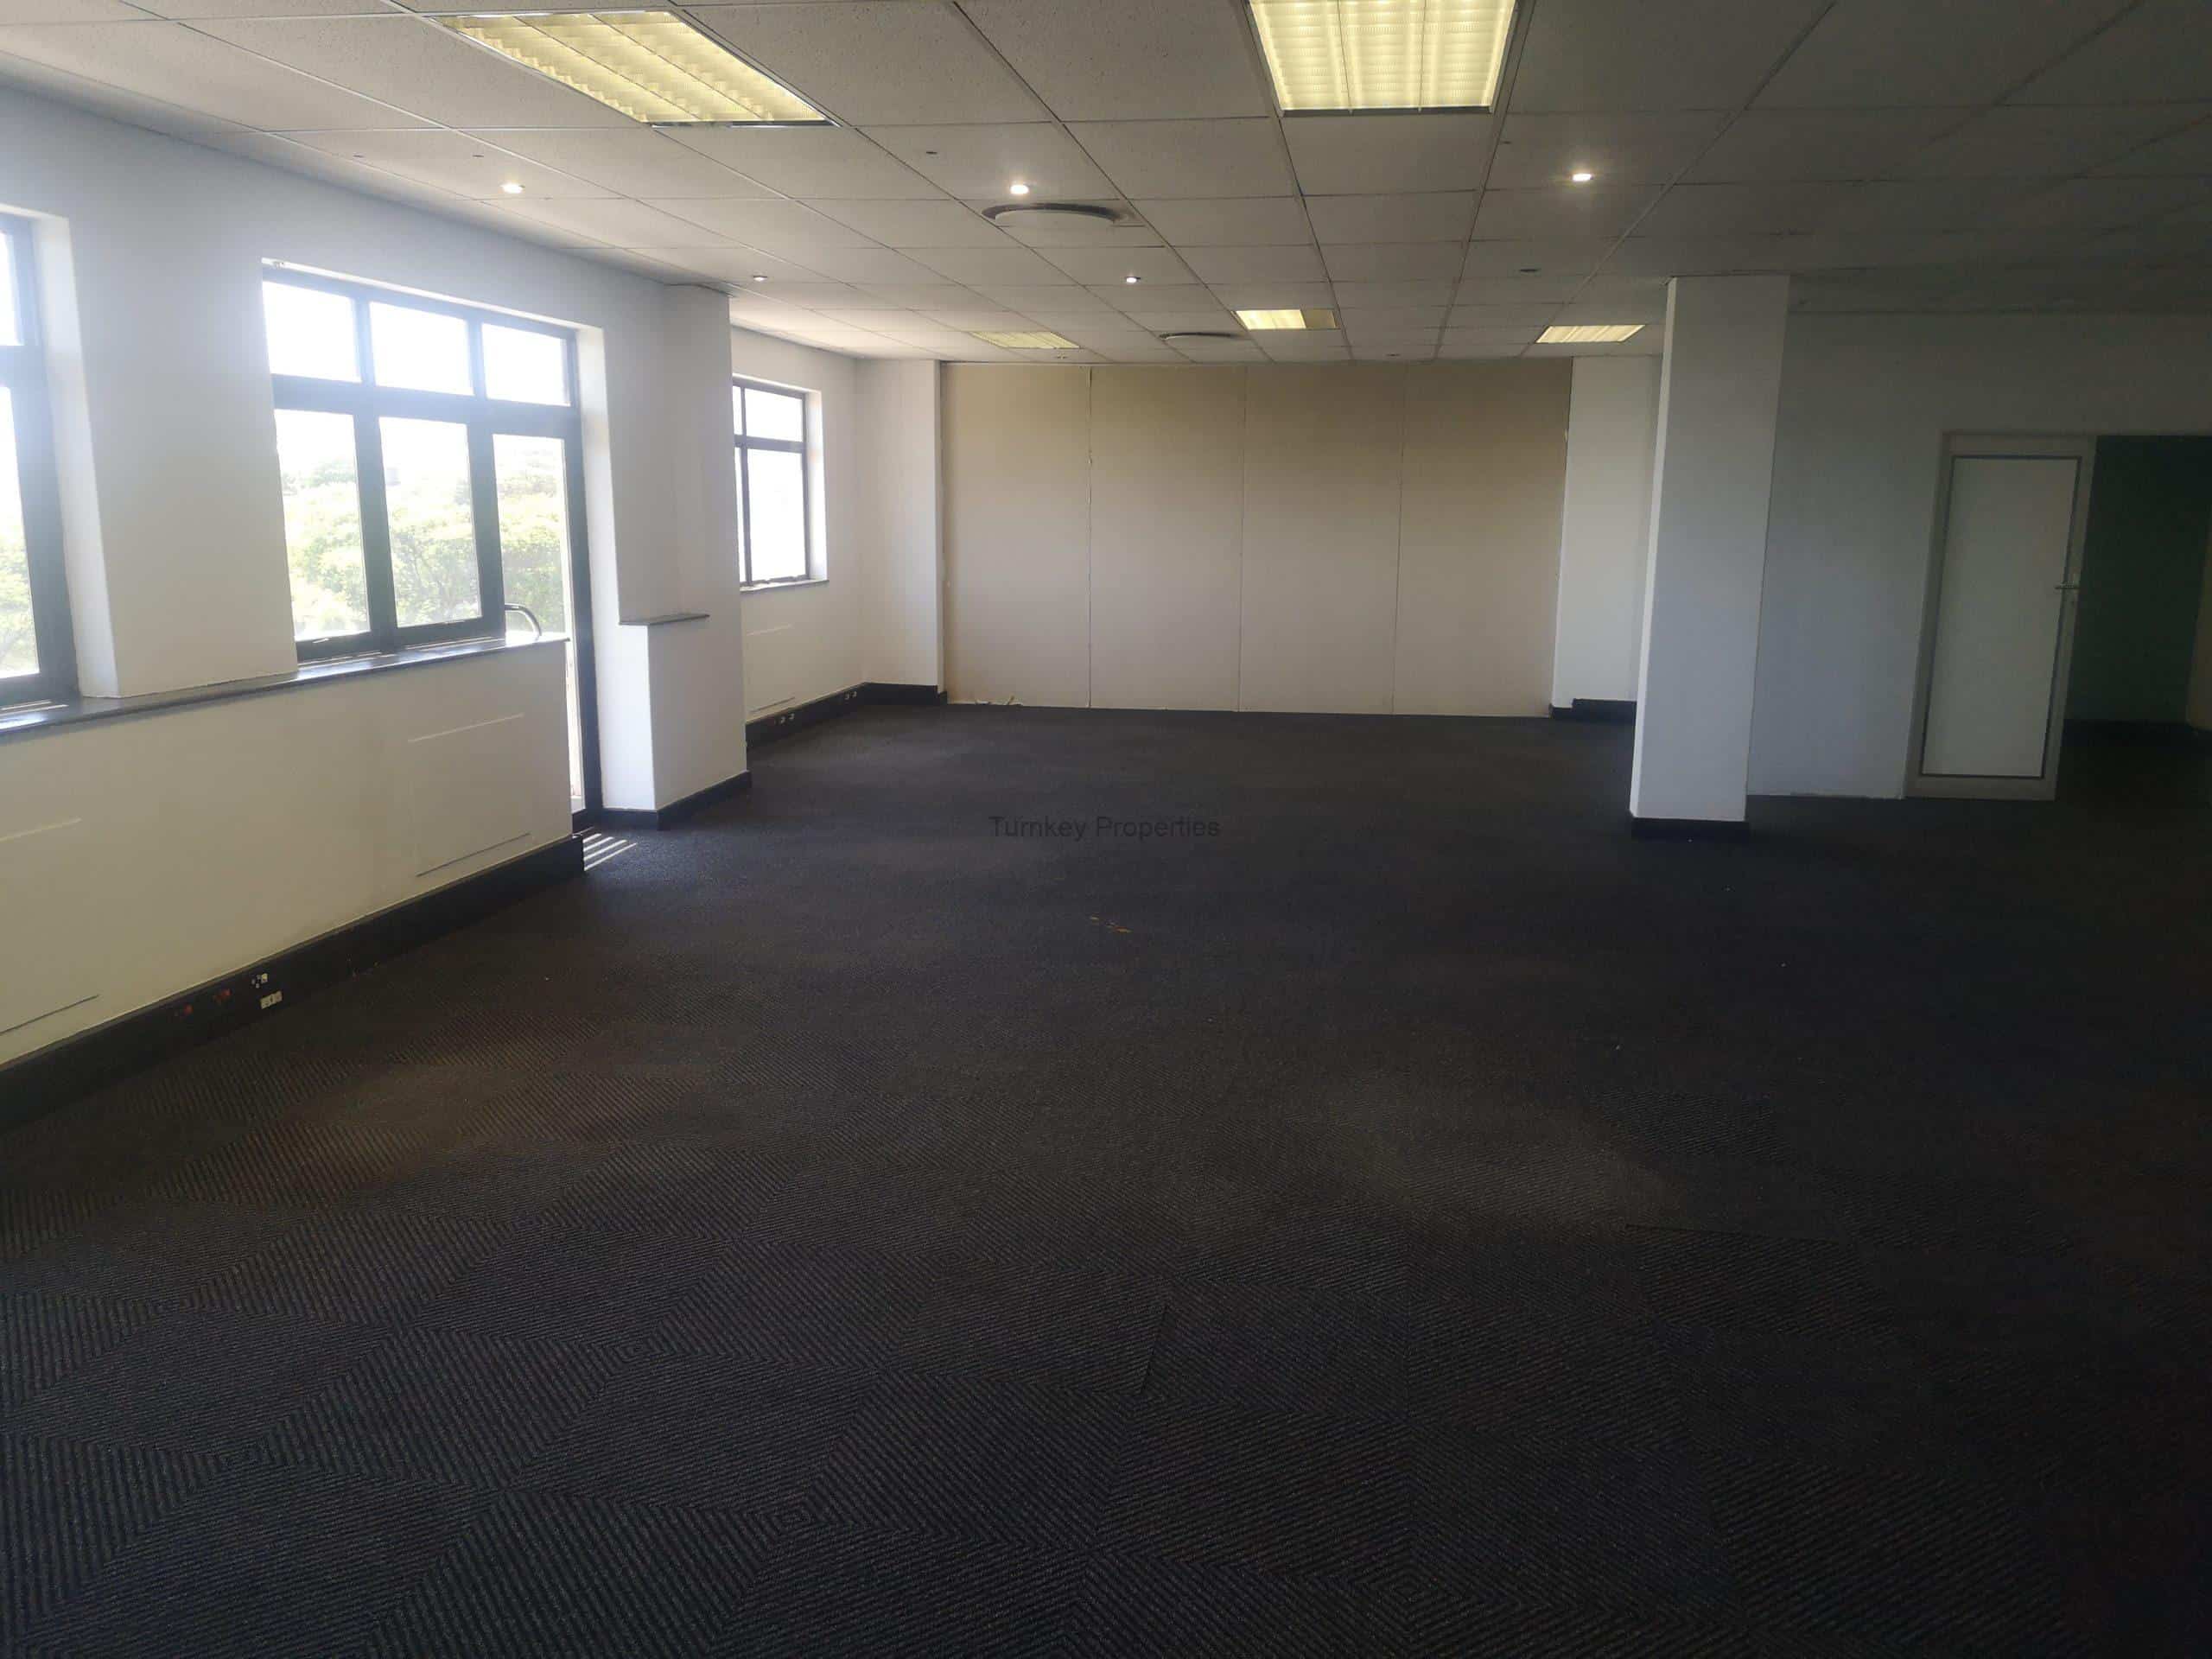 6358m² Industrial Property to Rent  Longmeadow Business Park 17 Angus Crecent